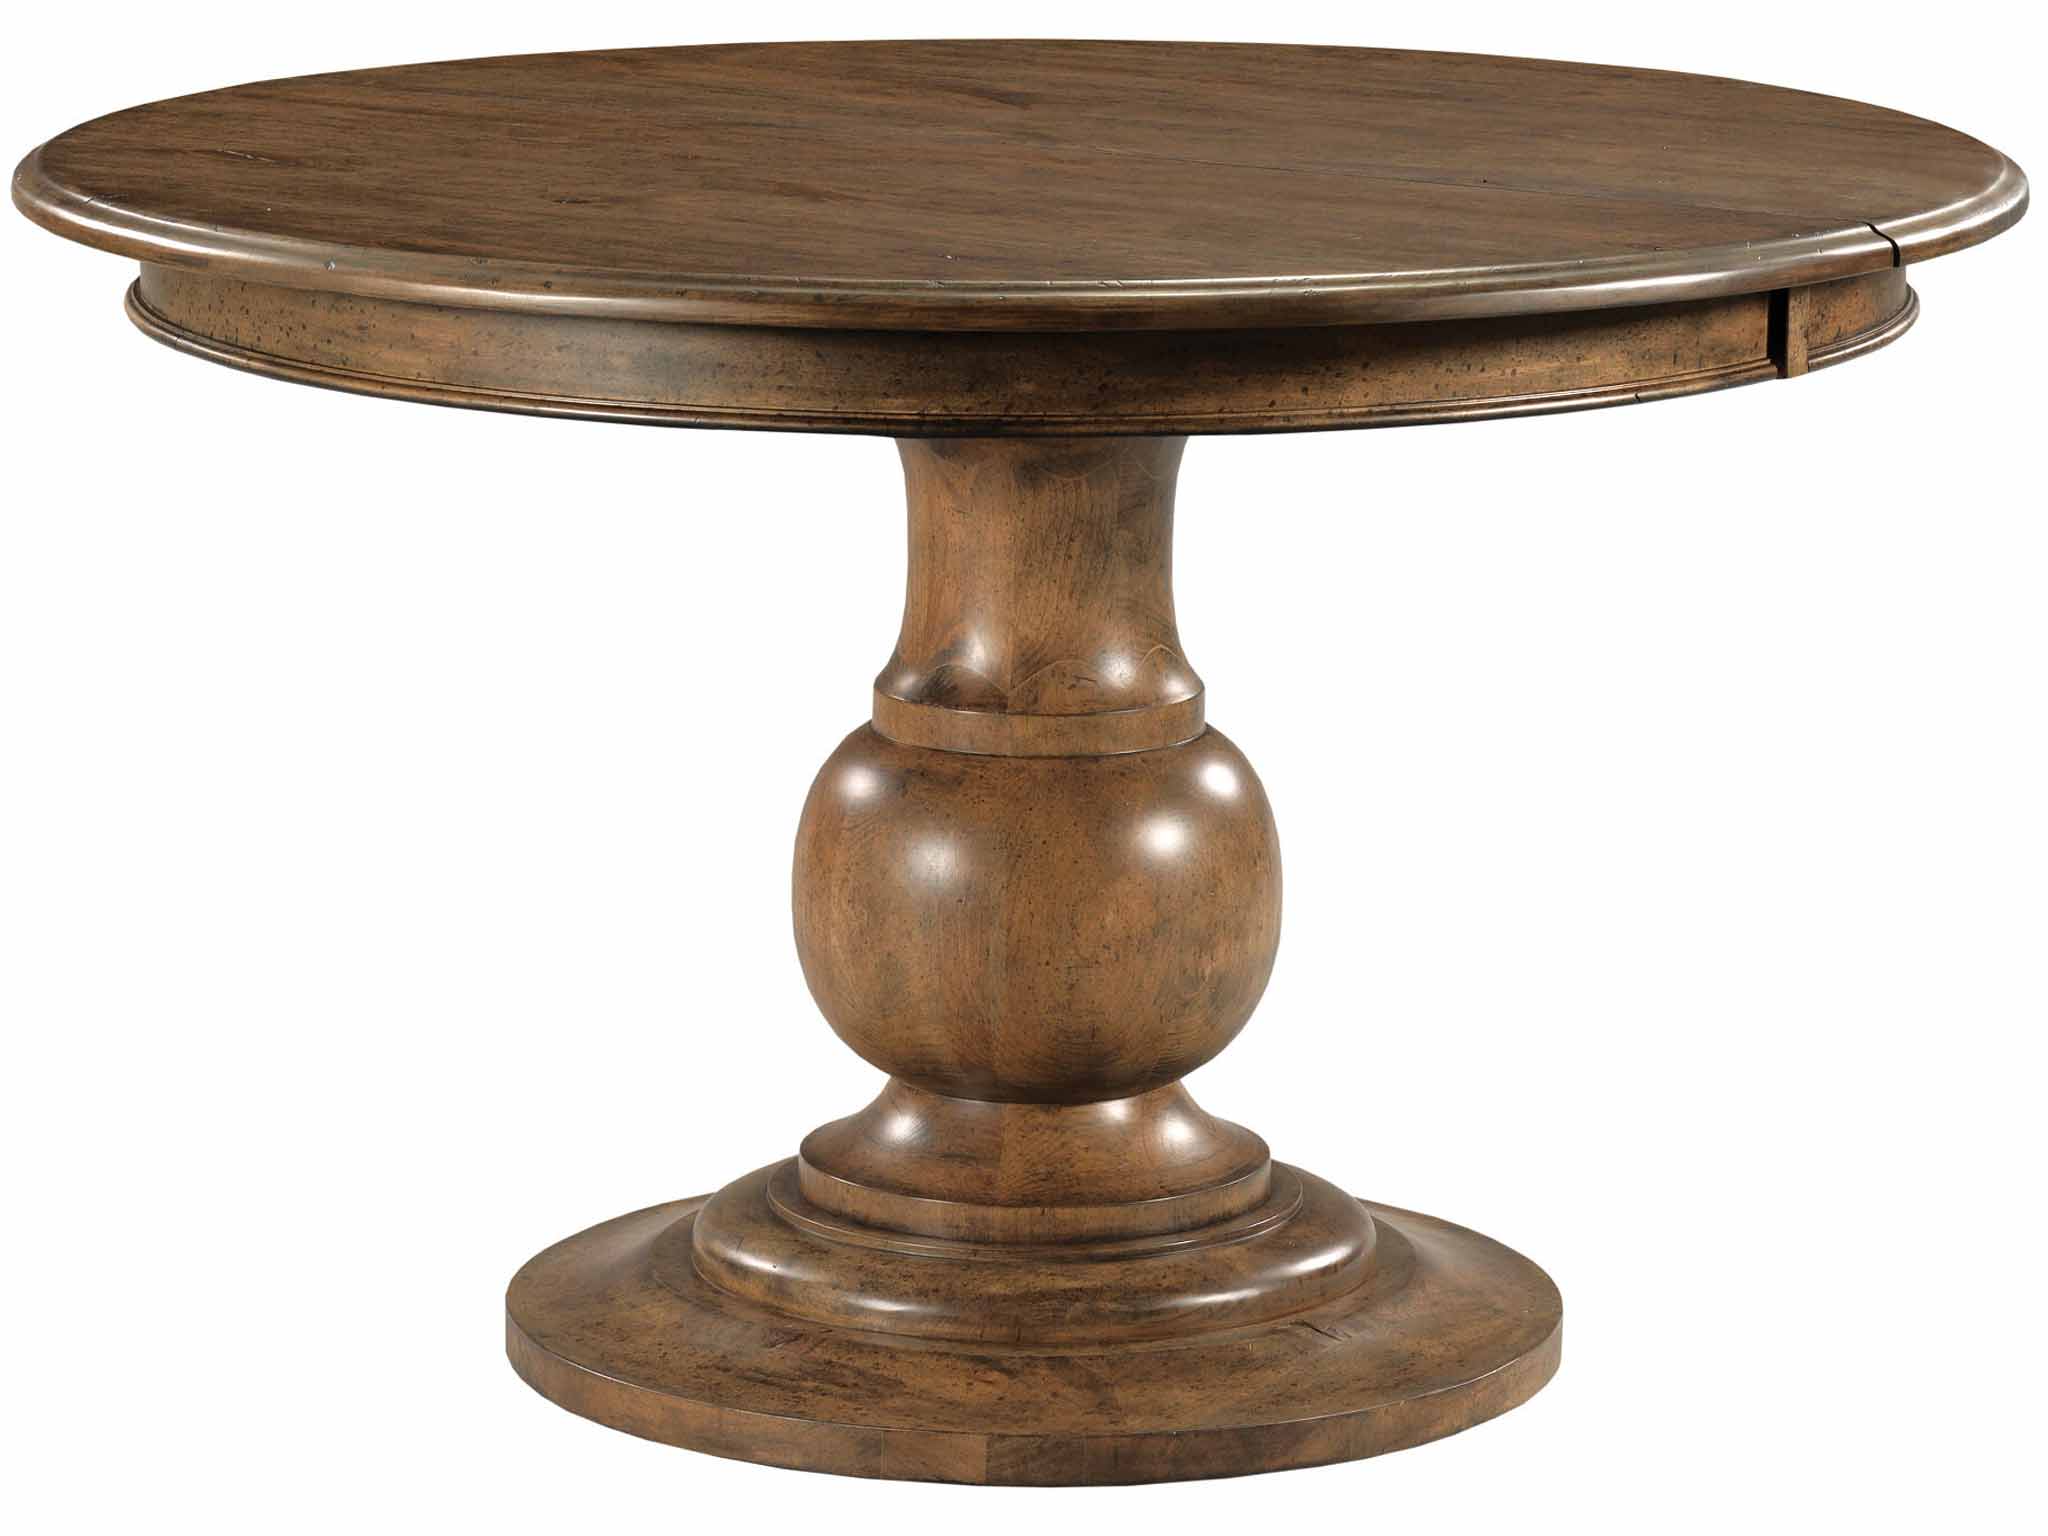 Kincaid 024-701P Ansley Whitson Round Pedestal Dining Table - Complete